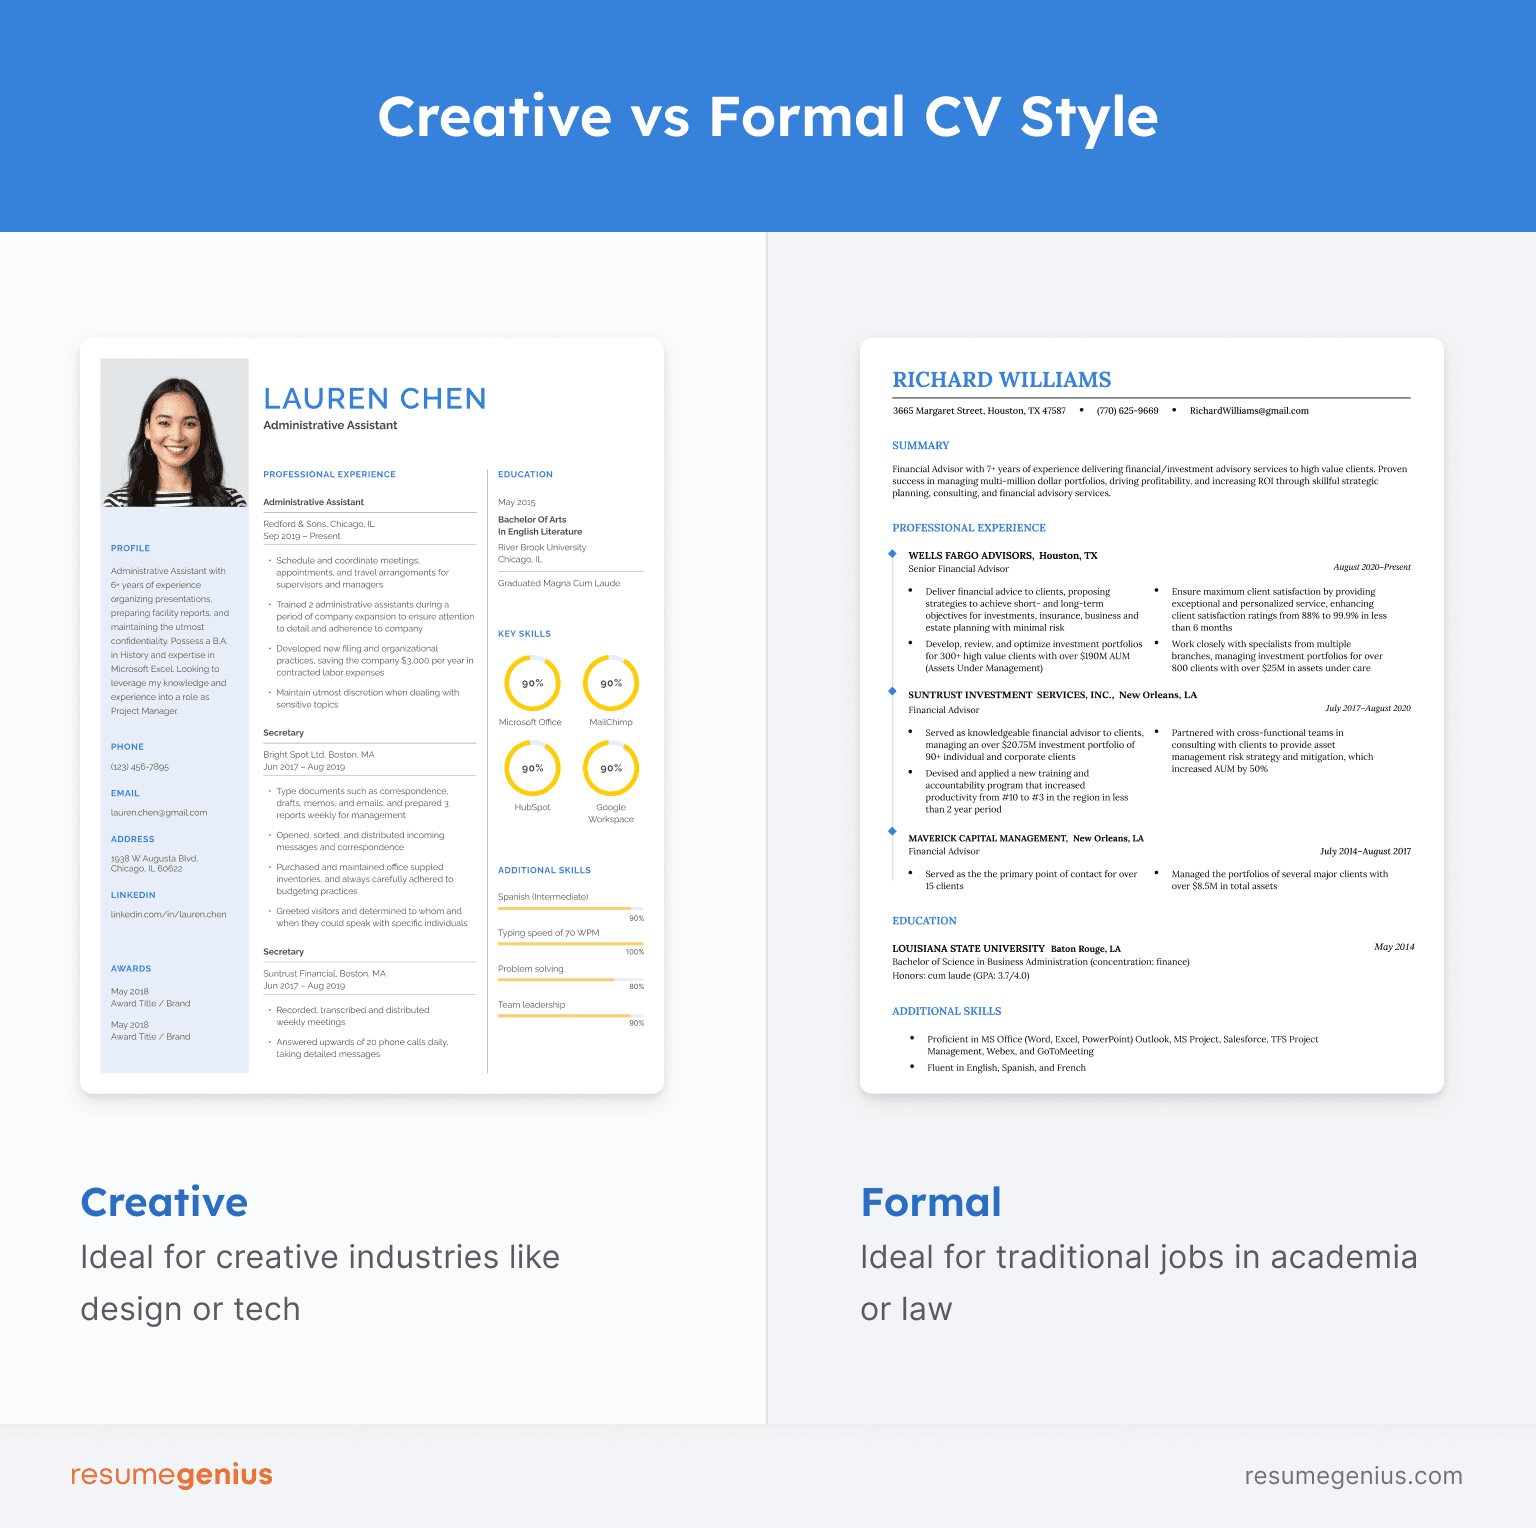 An image comparing a creative CV, featuring a headshot and bright colors, with a formal CV, which looks simple and minimalist